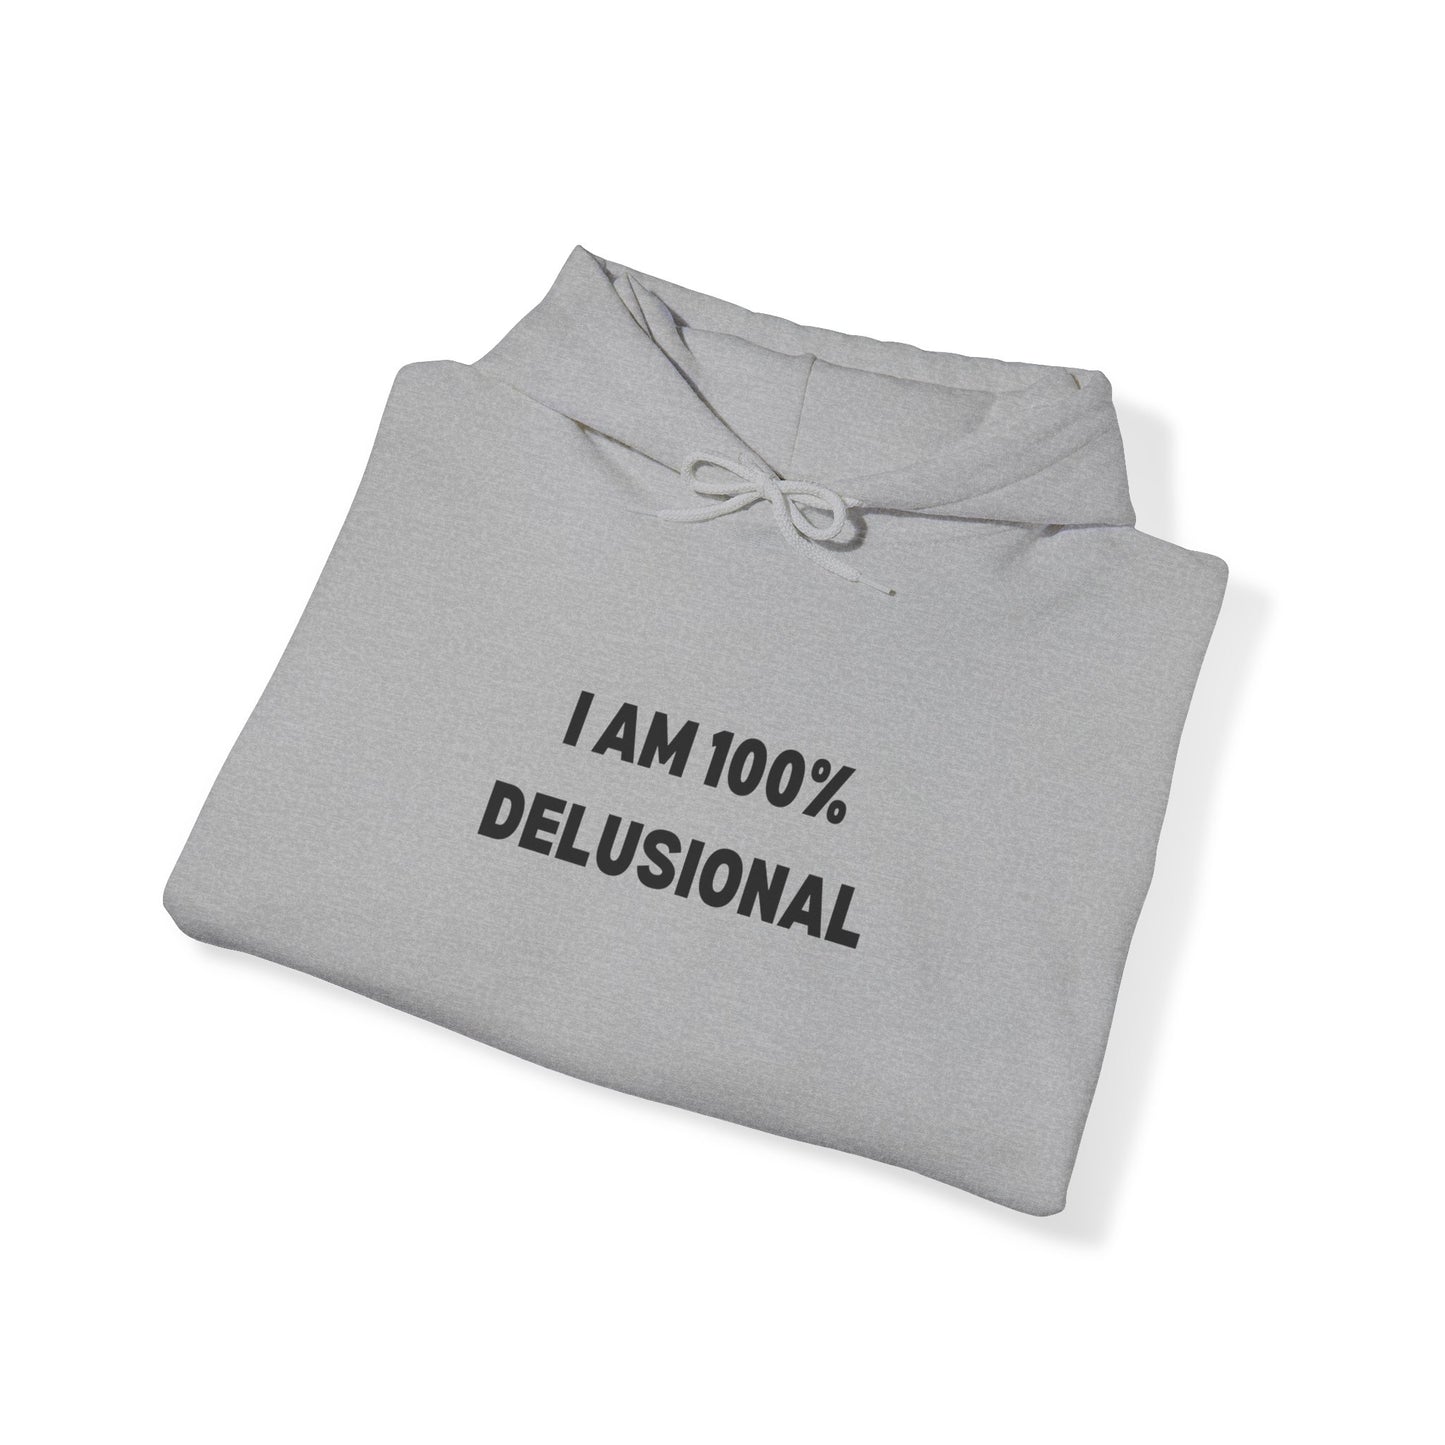 "I am 100% Delusional" - Hoodie